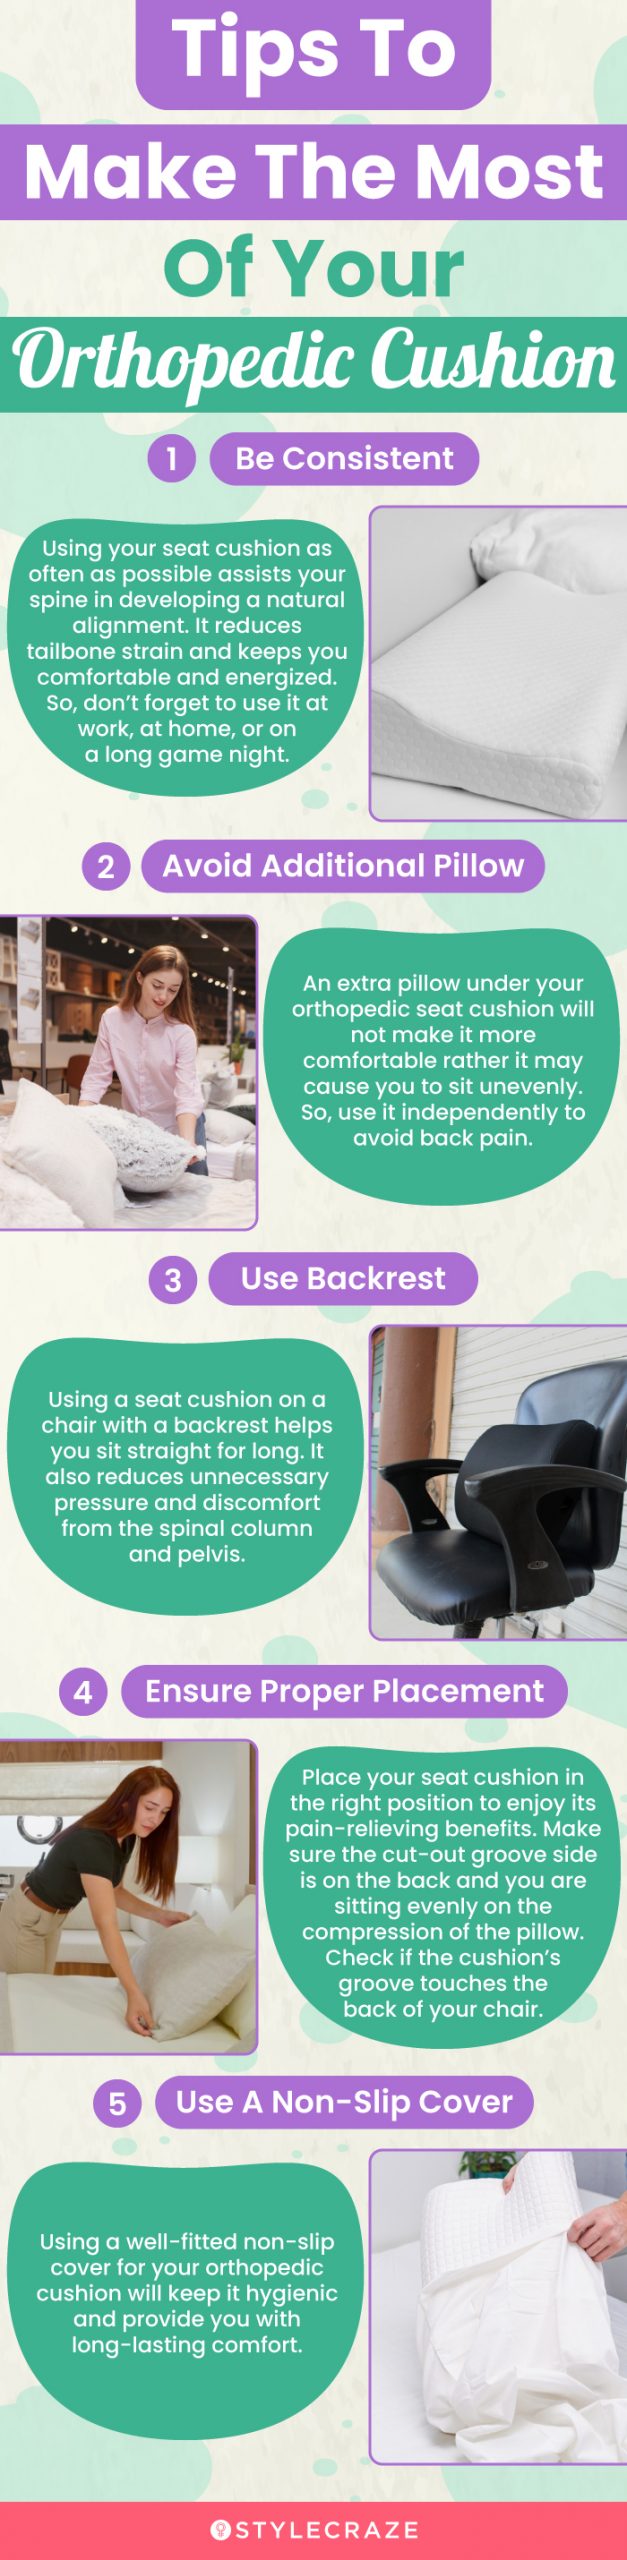 Tips To Make The Most Of Your Orthopedic Cushion (infographic)